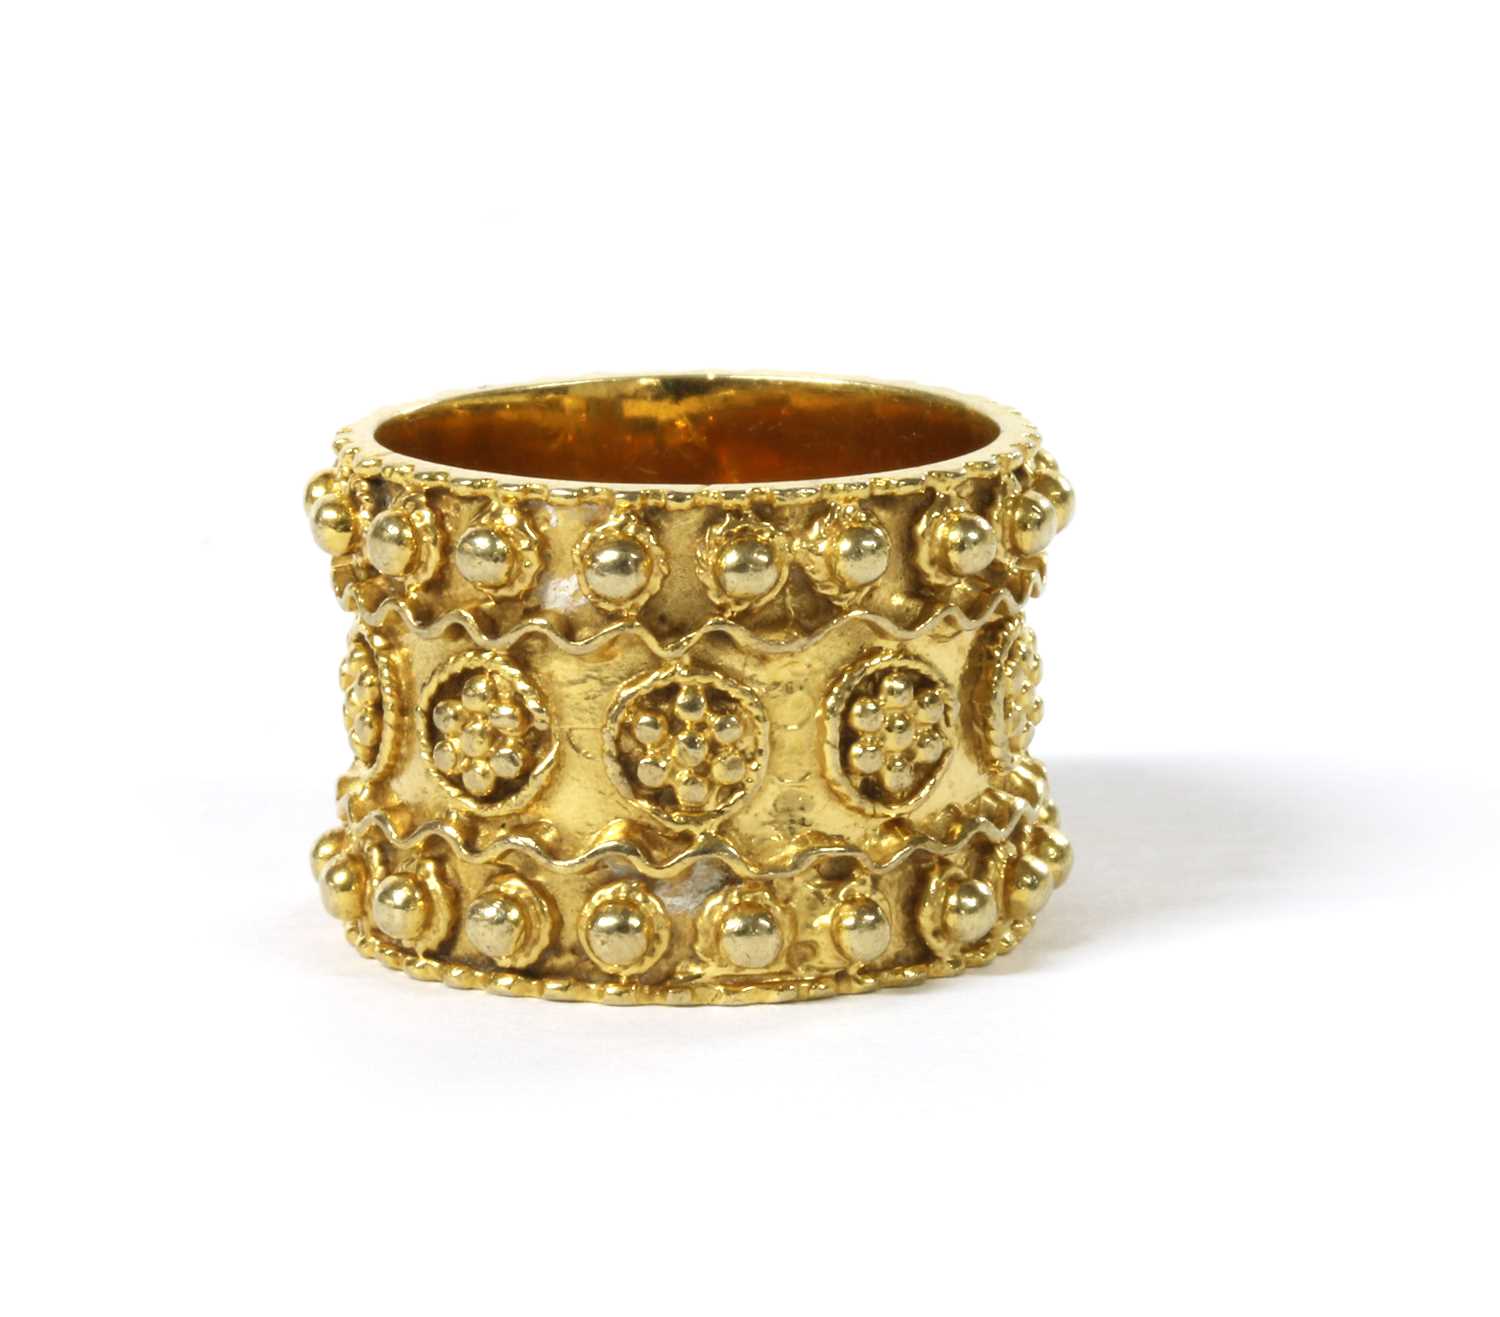 Lot 98 - A 9ct gold Etruscan Revival-style ring, c.1970